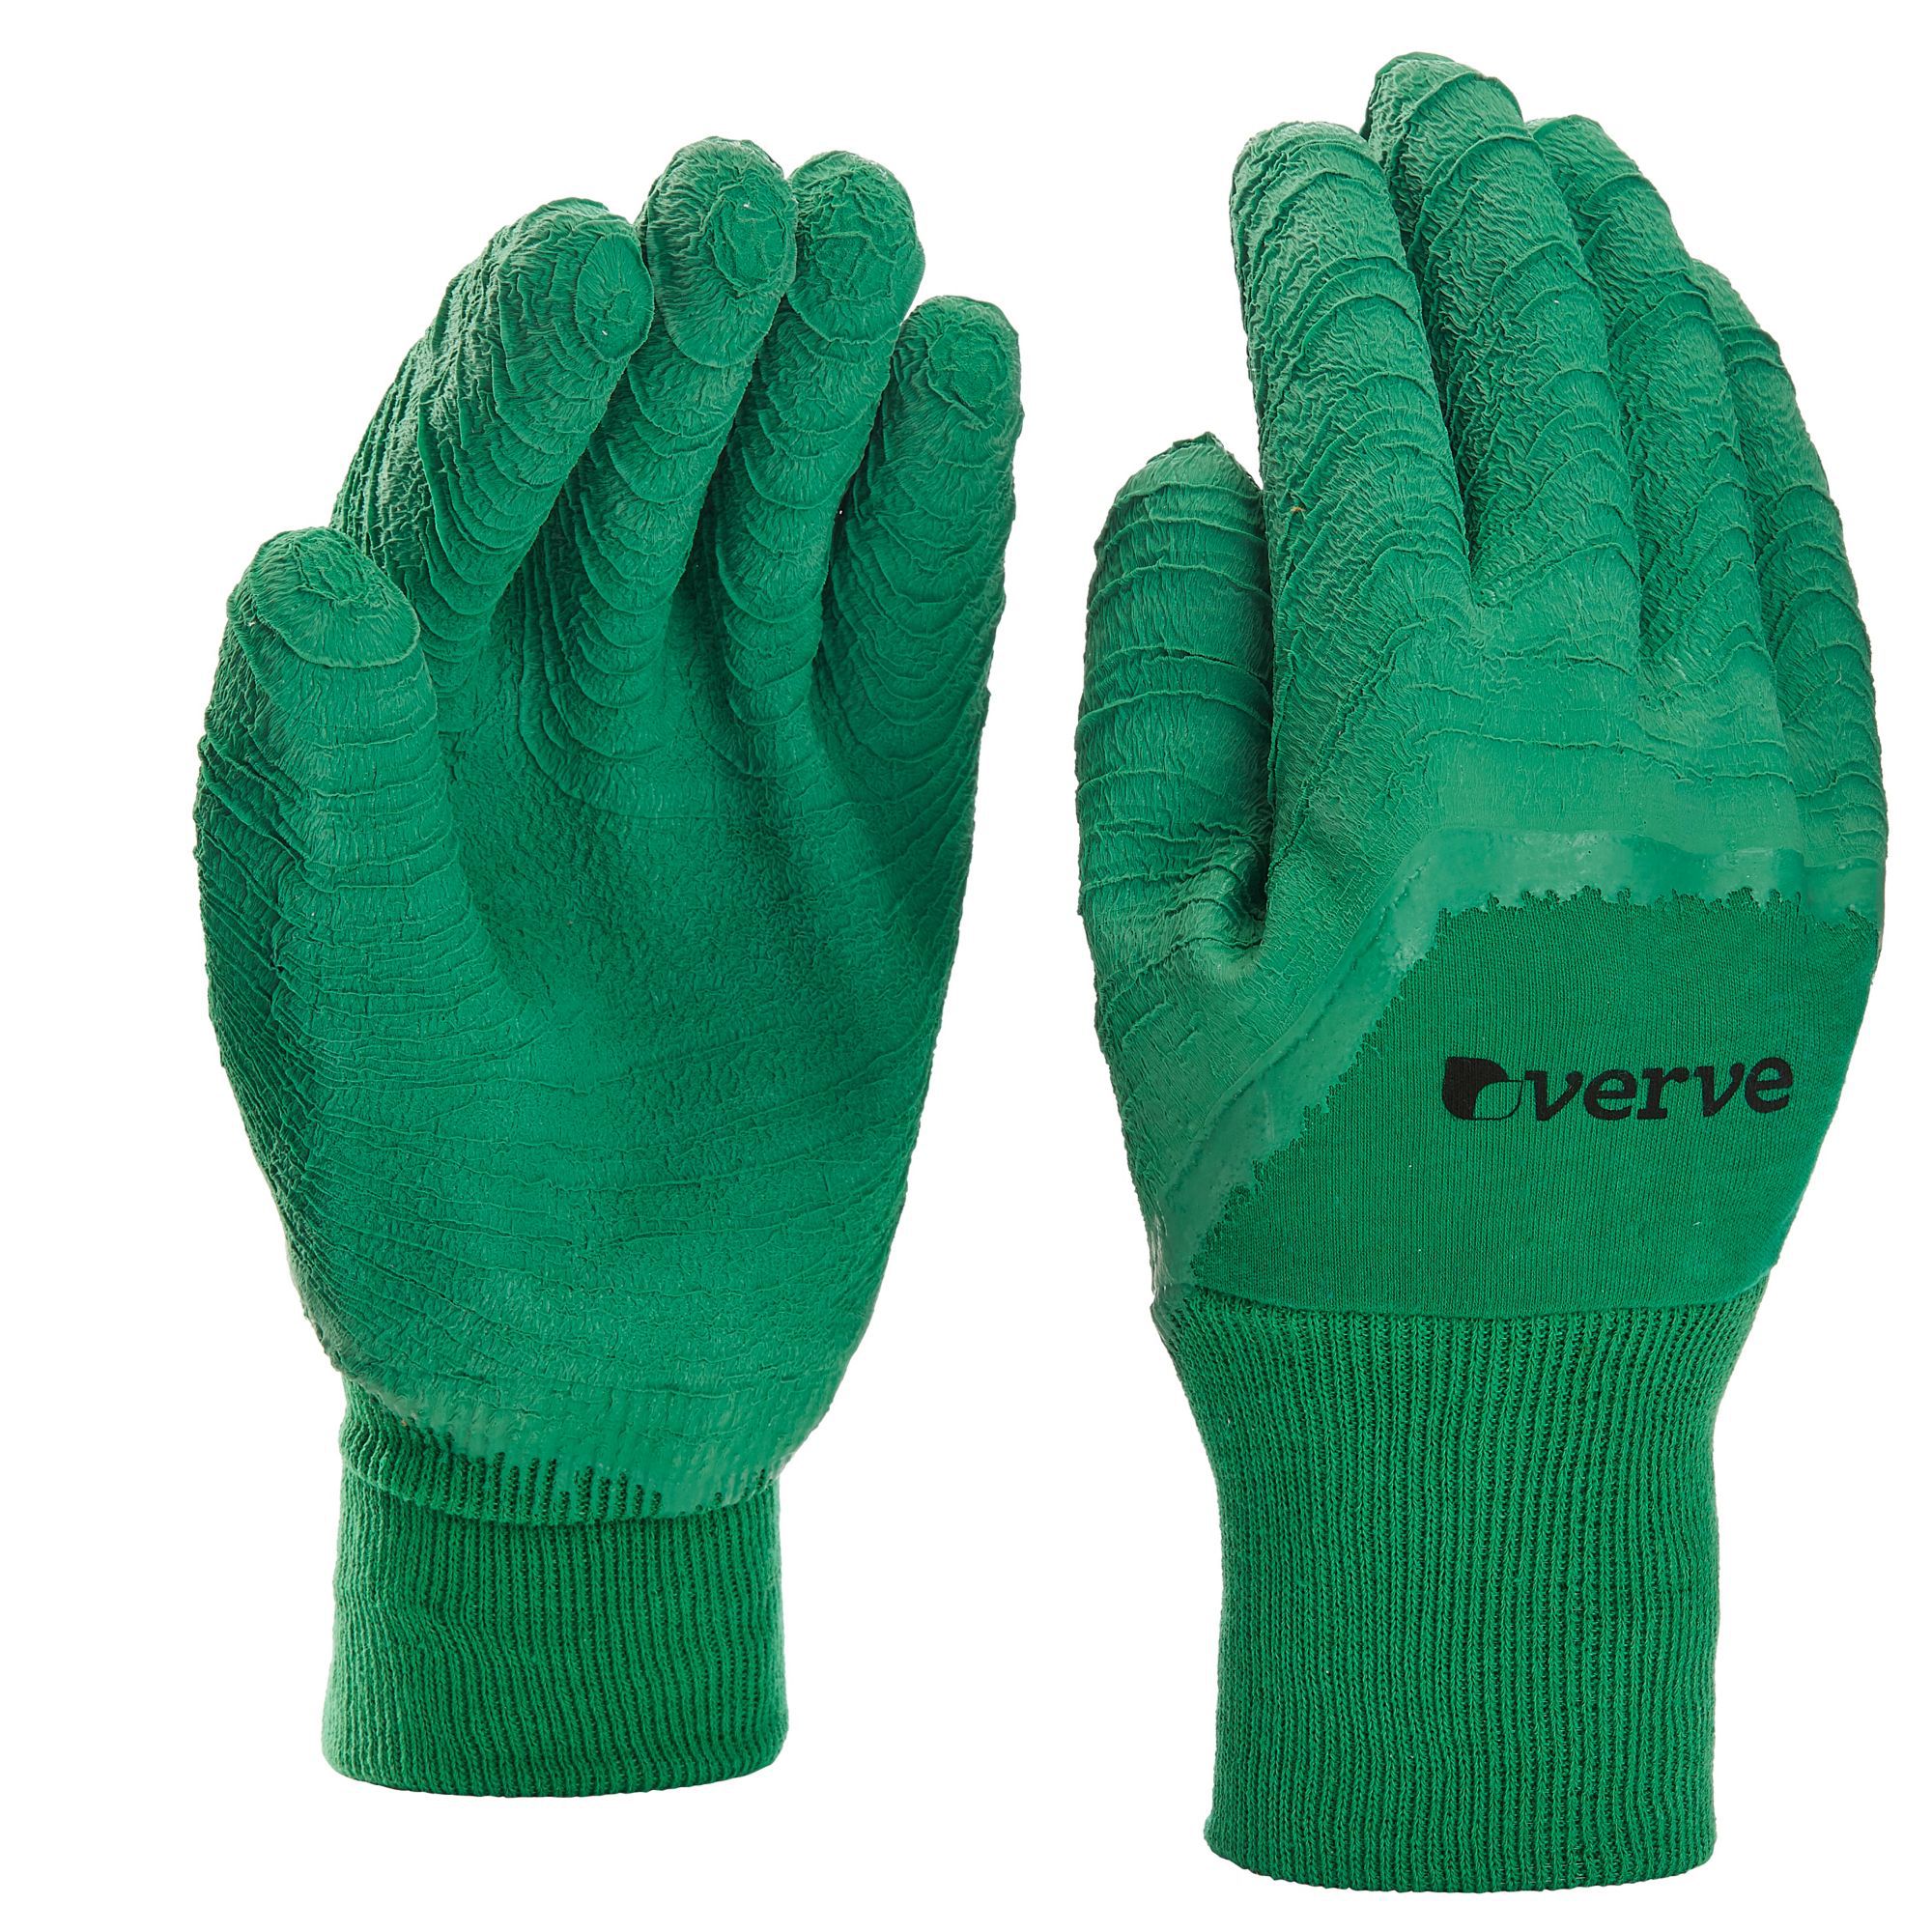 Verve Polyester (PES) Gardening gloves, Small